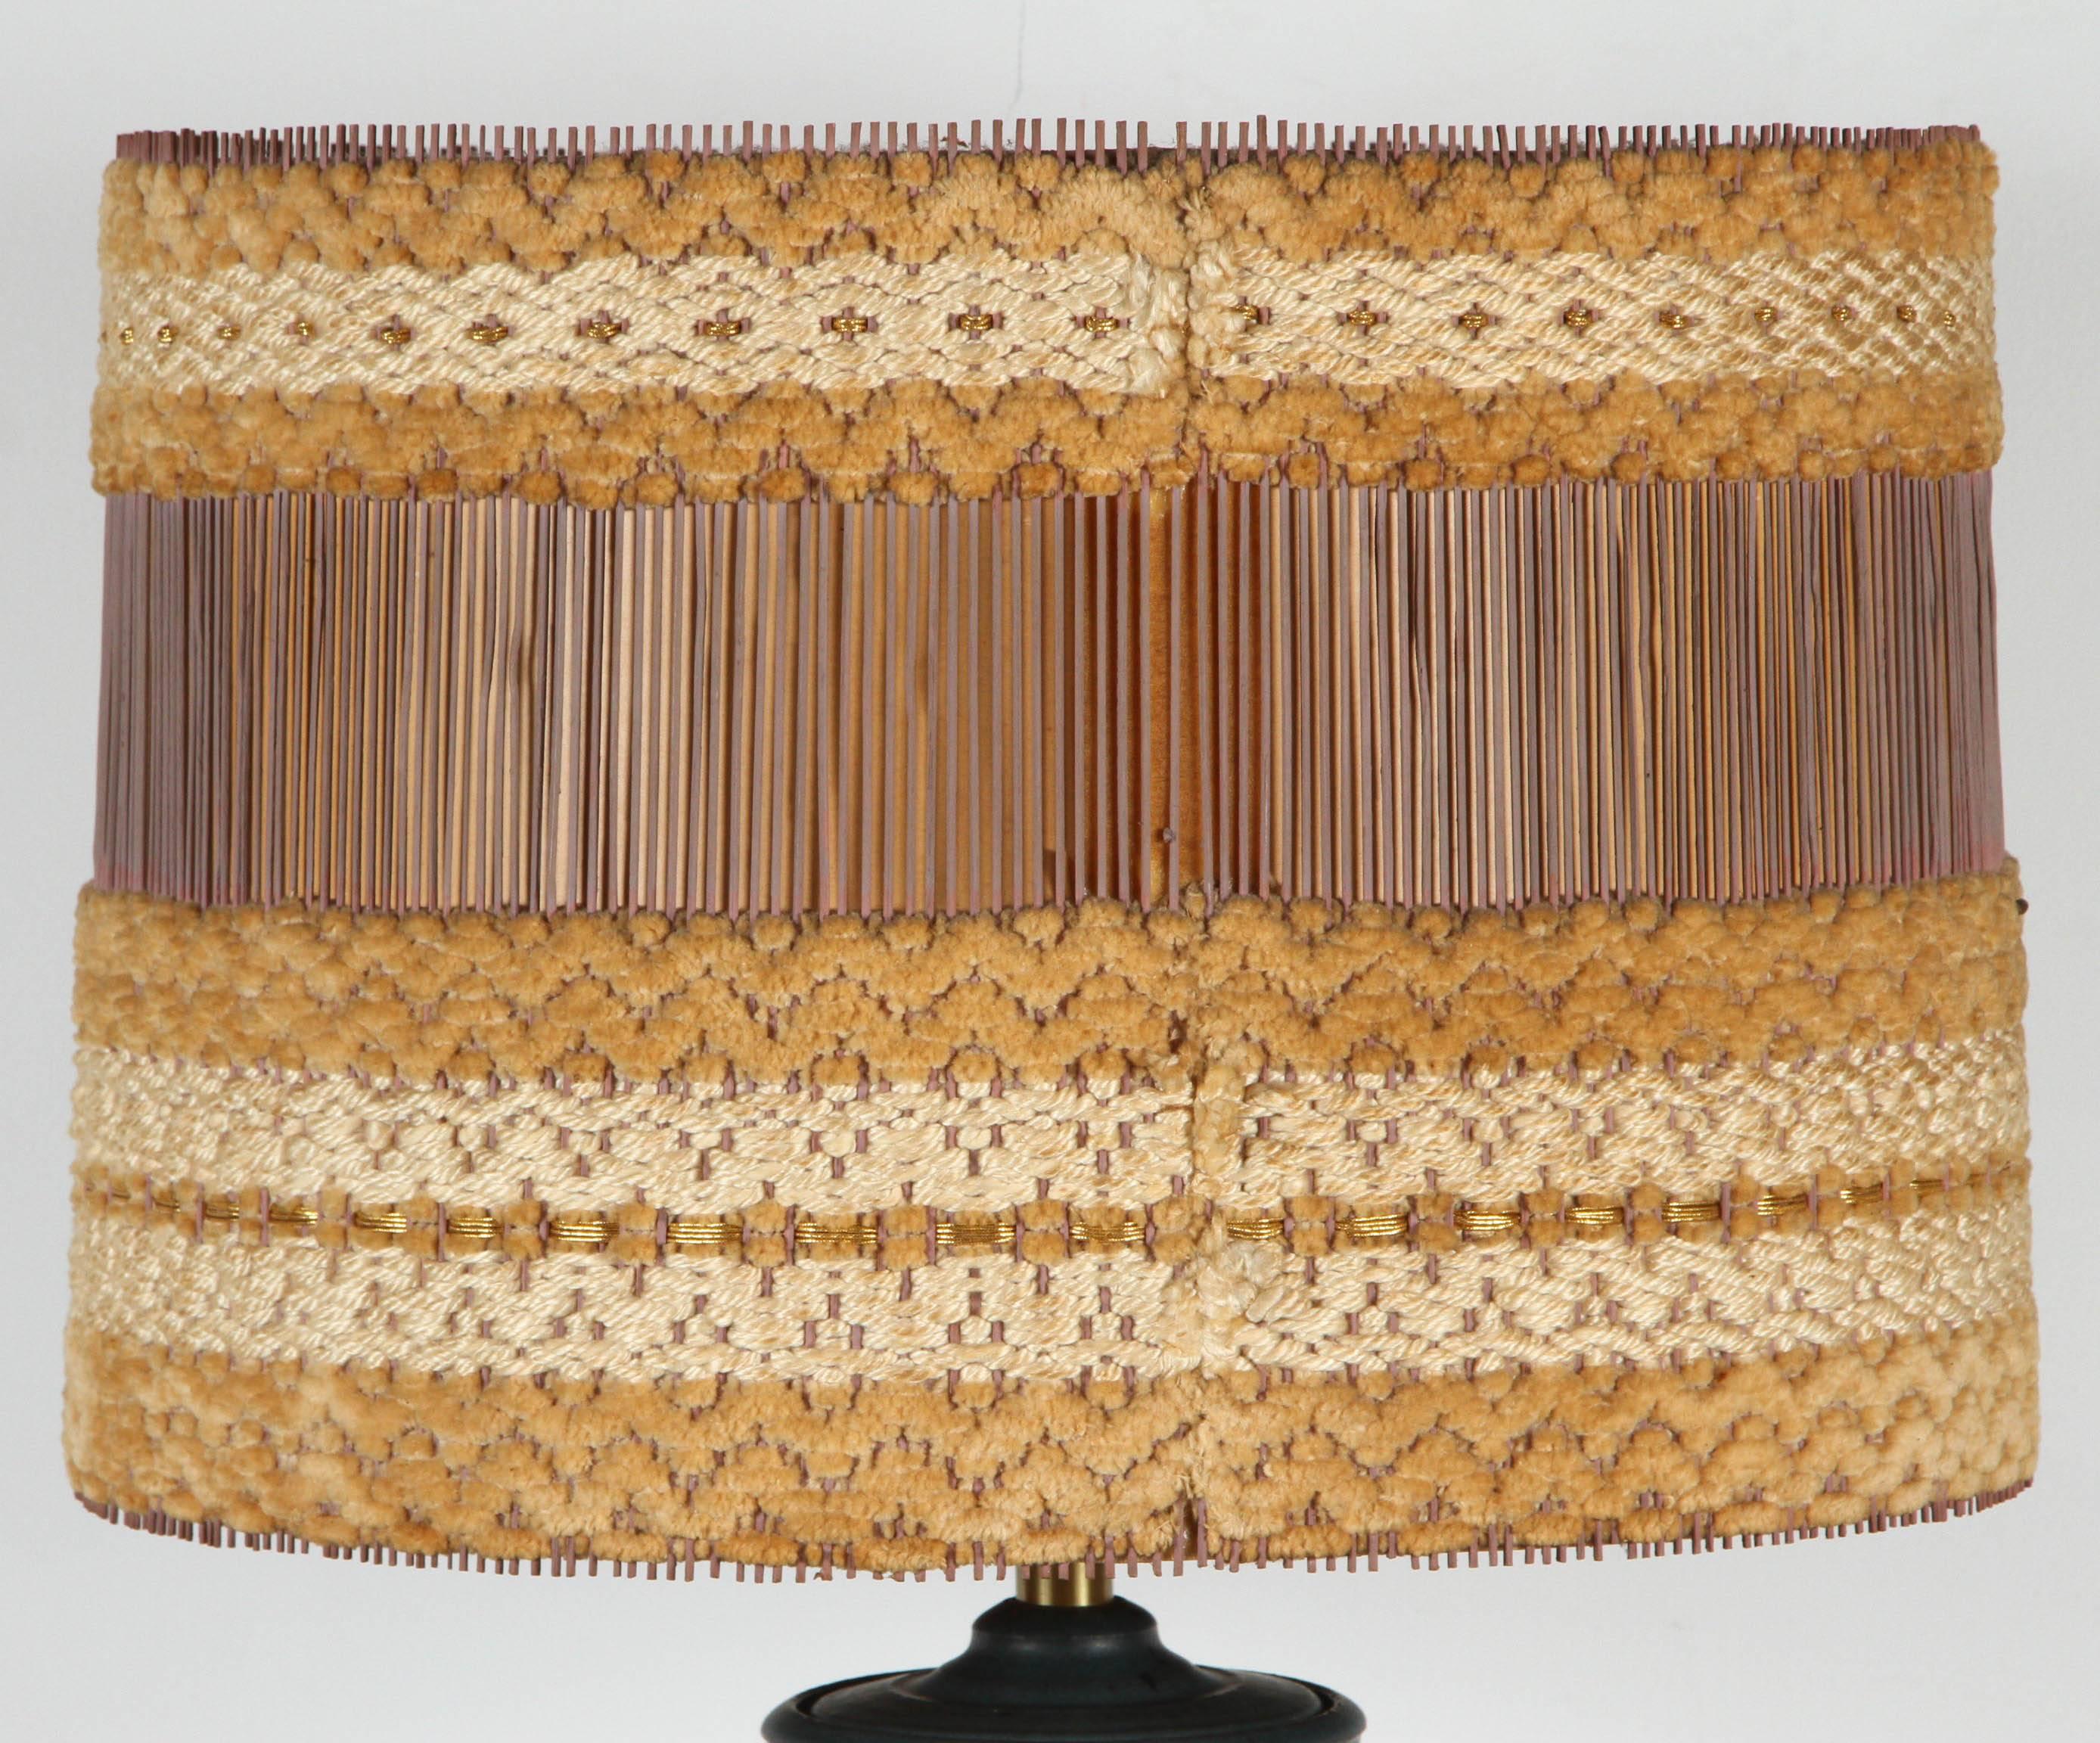 Hand thrown and glazed ceramic lamp base with swirl texture by Bob Kinzie for Affiliated Craftsmen, paired with a Maria Kipp wood and fiber lampshade. Both lamp and shade are in great condition. Lamp made in San Diego, California.

Shade